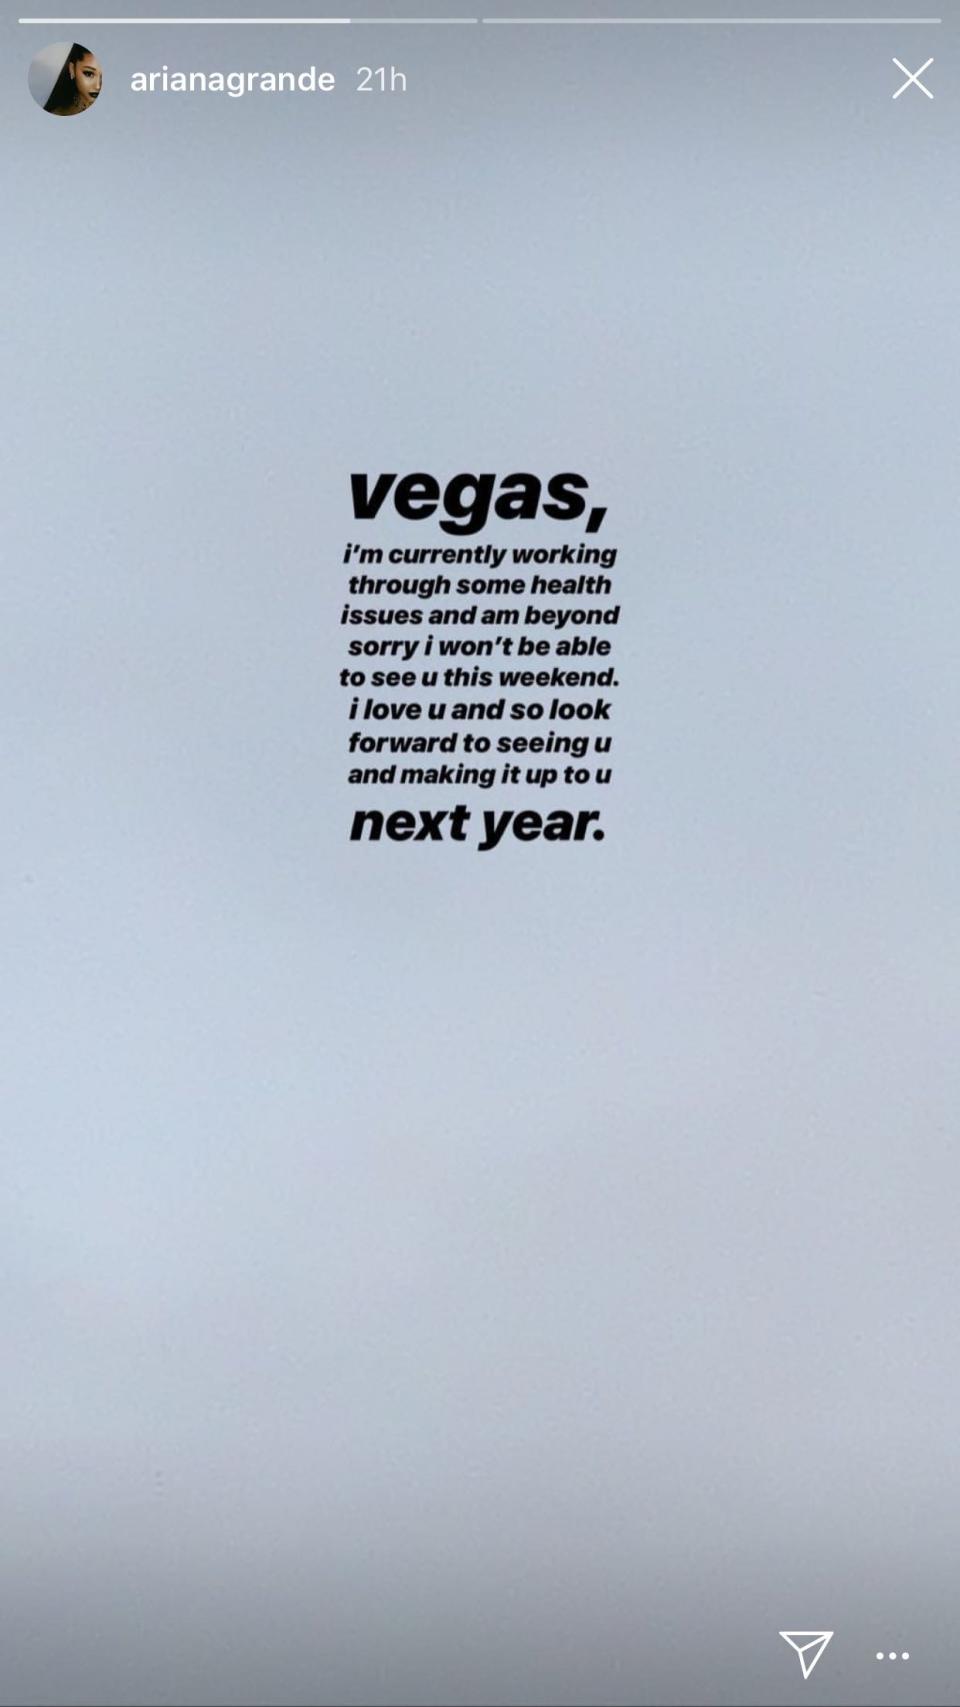 Ariana Grande announced in an Instagram Story that she has canceled her Las Vegas New Year's concert over health concerns.